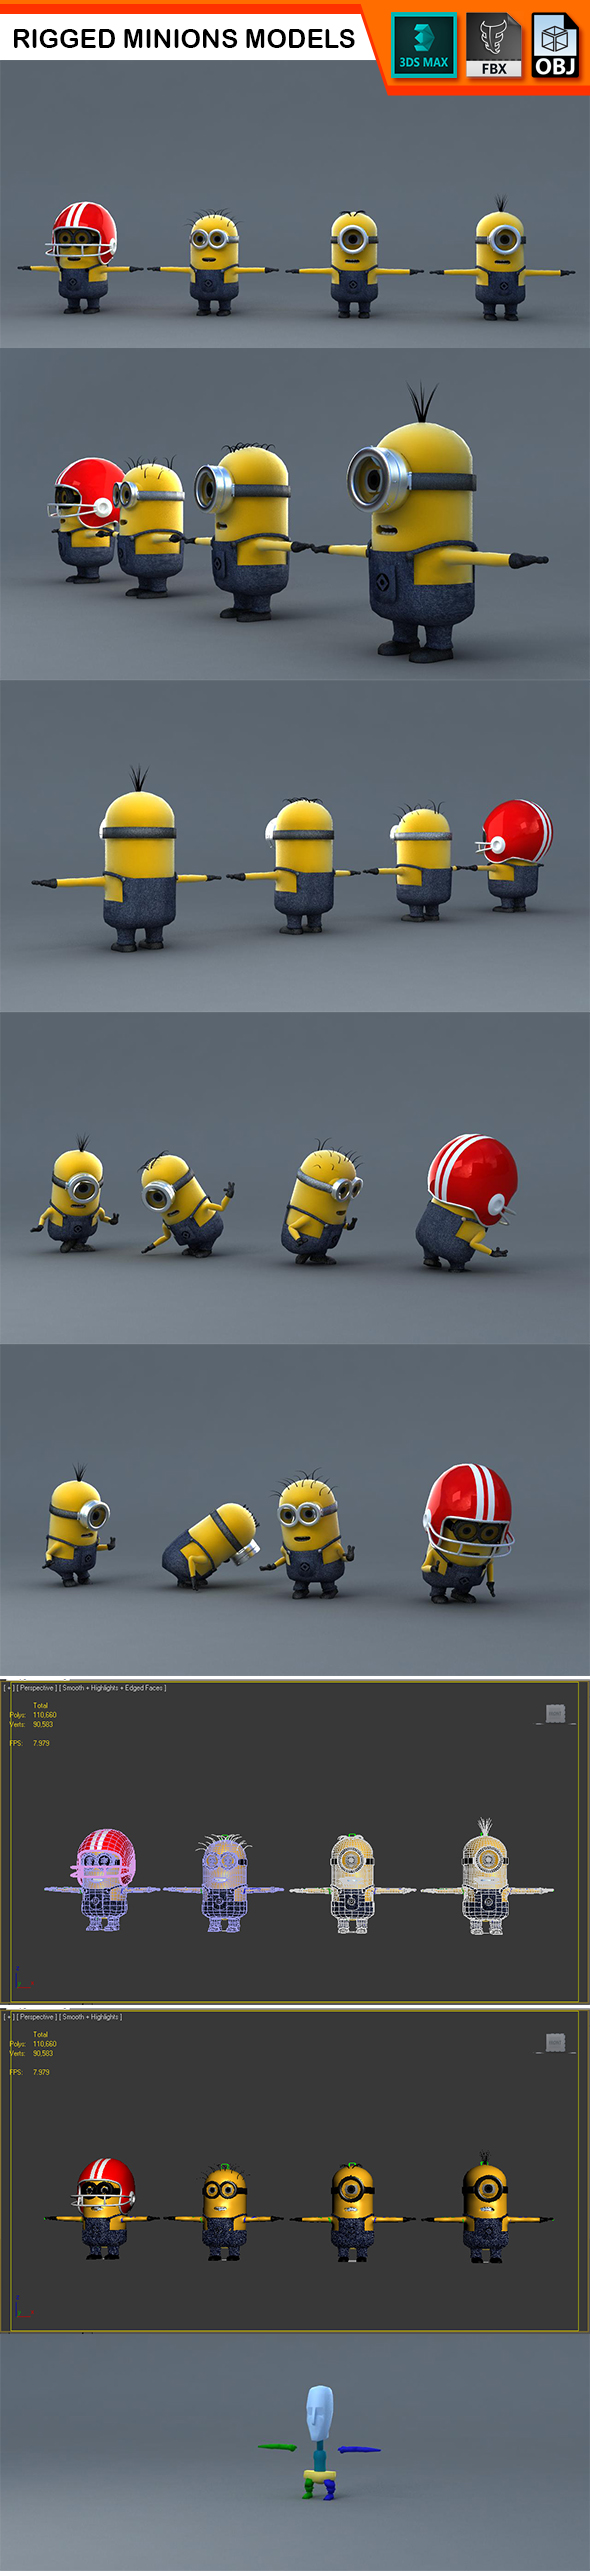 Minions Models Rigged - 3Docean 24850075